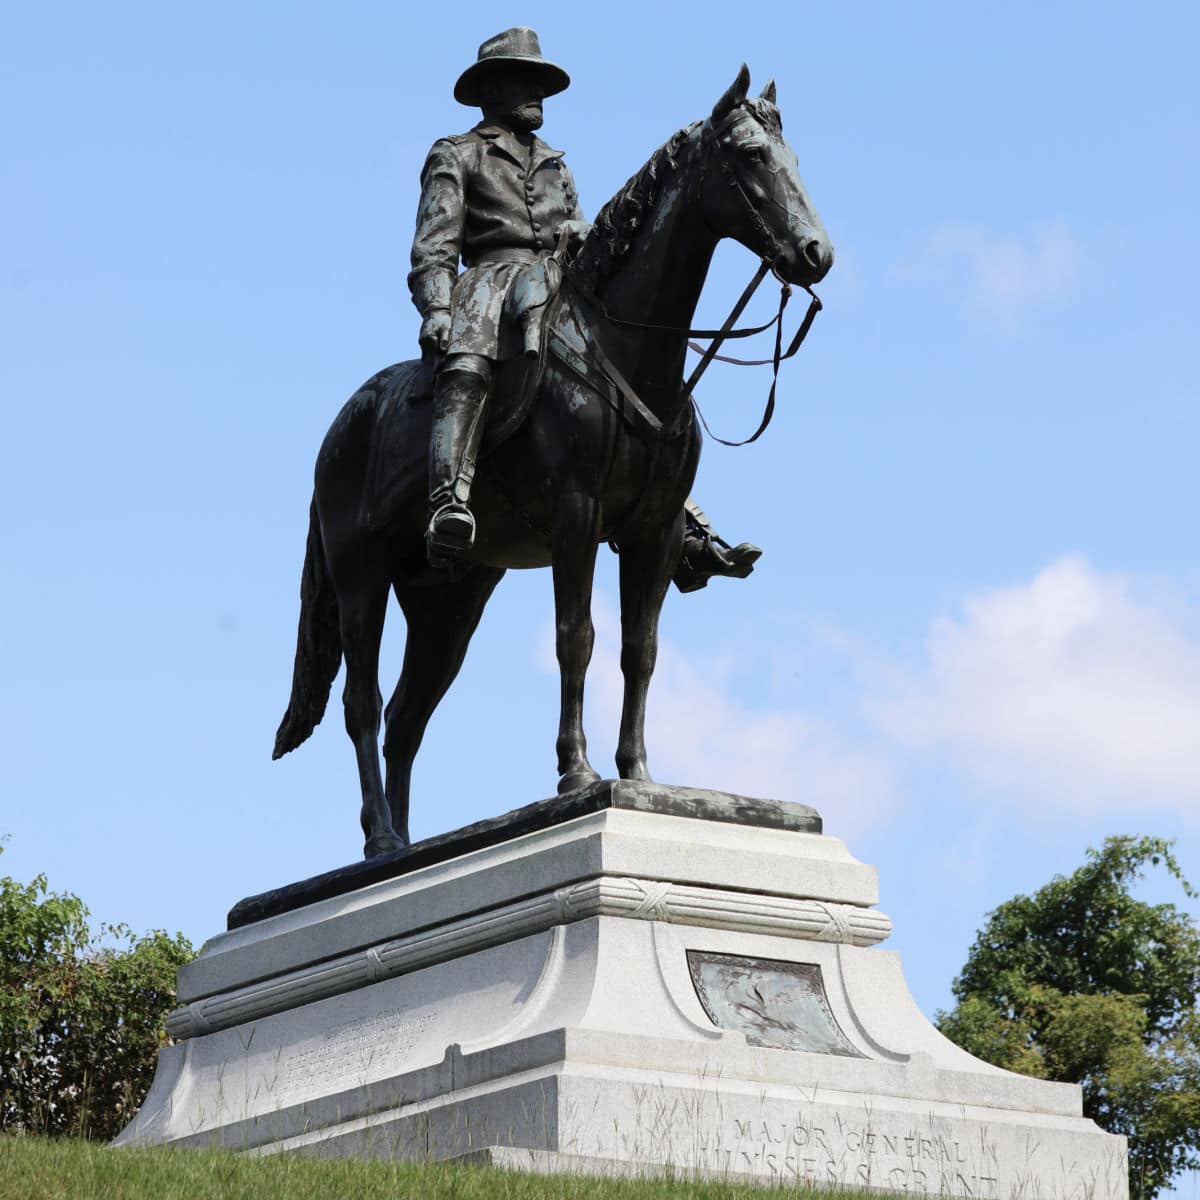 Monument with Major General Ulysses S. Grant riding a horse at Vicksburg National Military Park